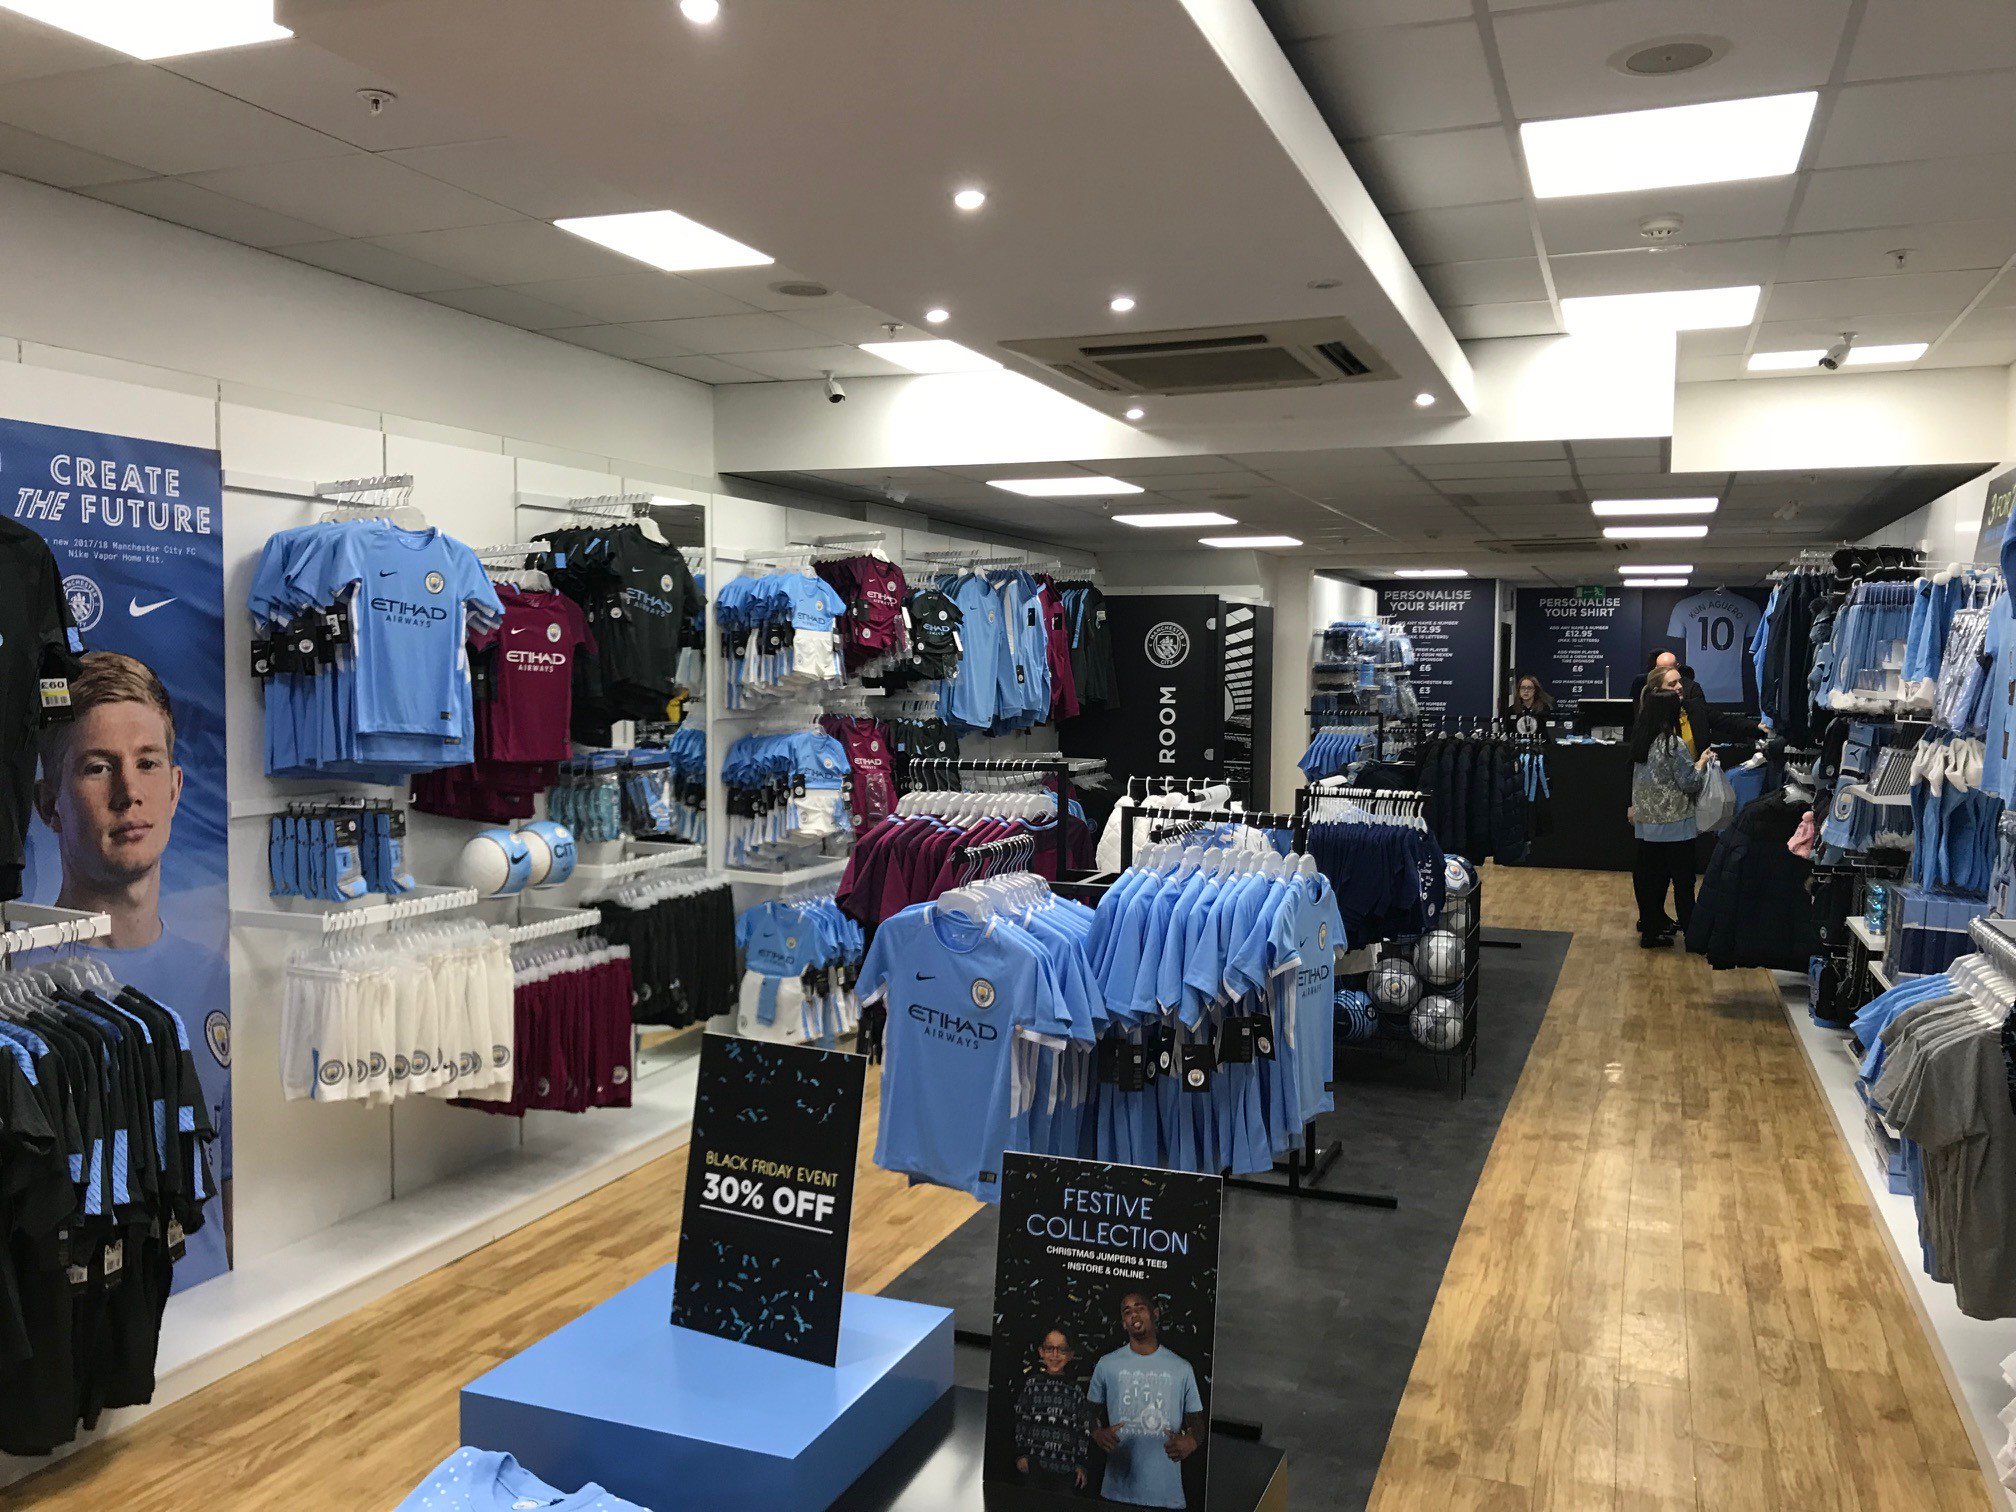 Manchester City on Twitter: "Our new City Store is now open in Manchester's Arndale with a off #BlackFriday weekend deal! #mancity https://t.co/Fq8RwuuEPA" / Twitter